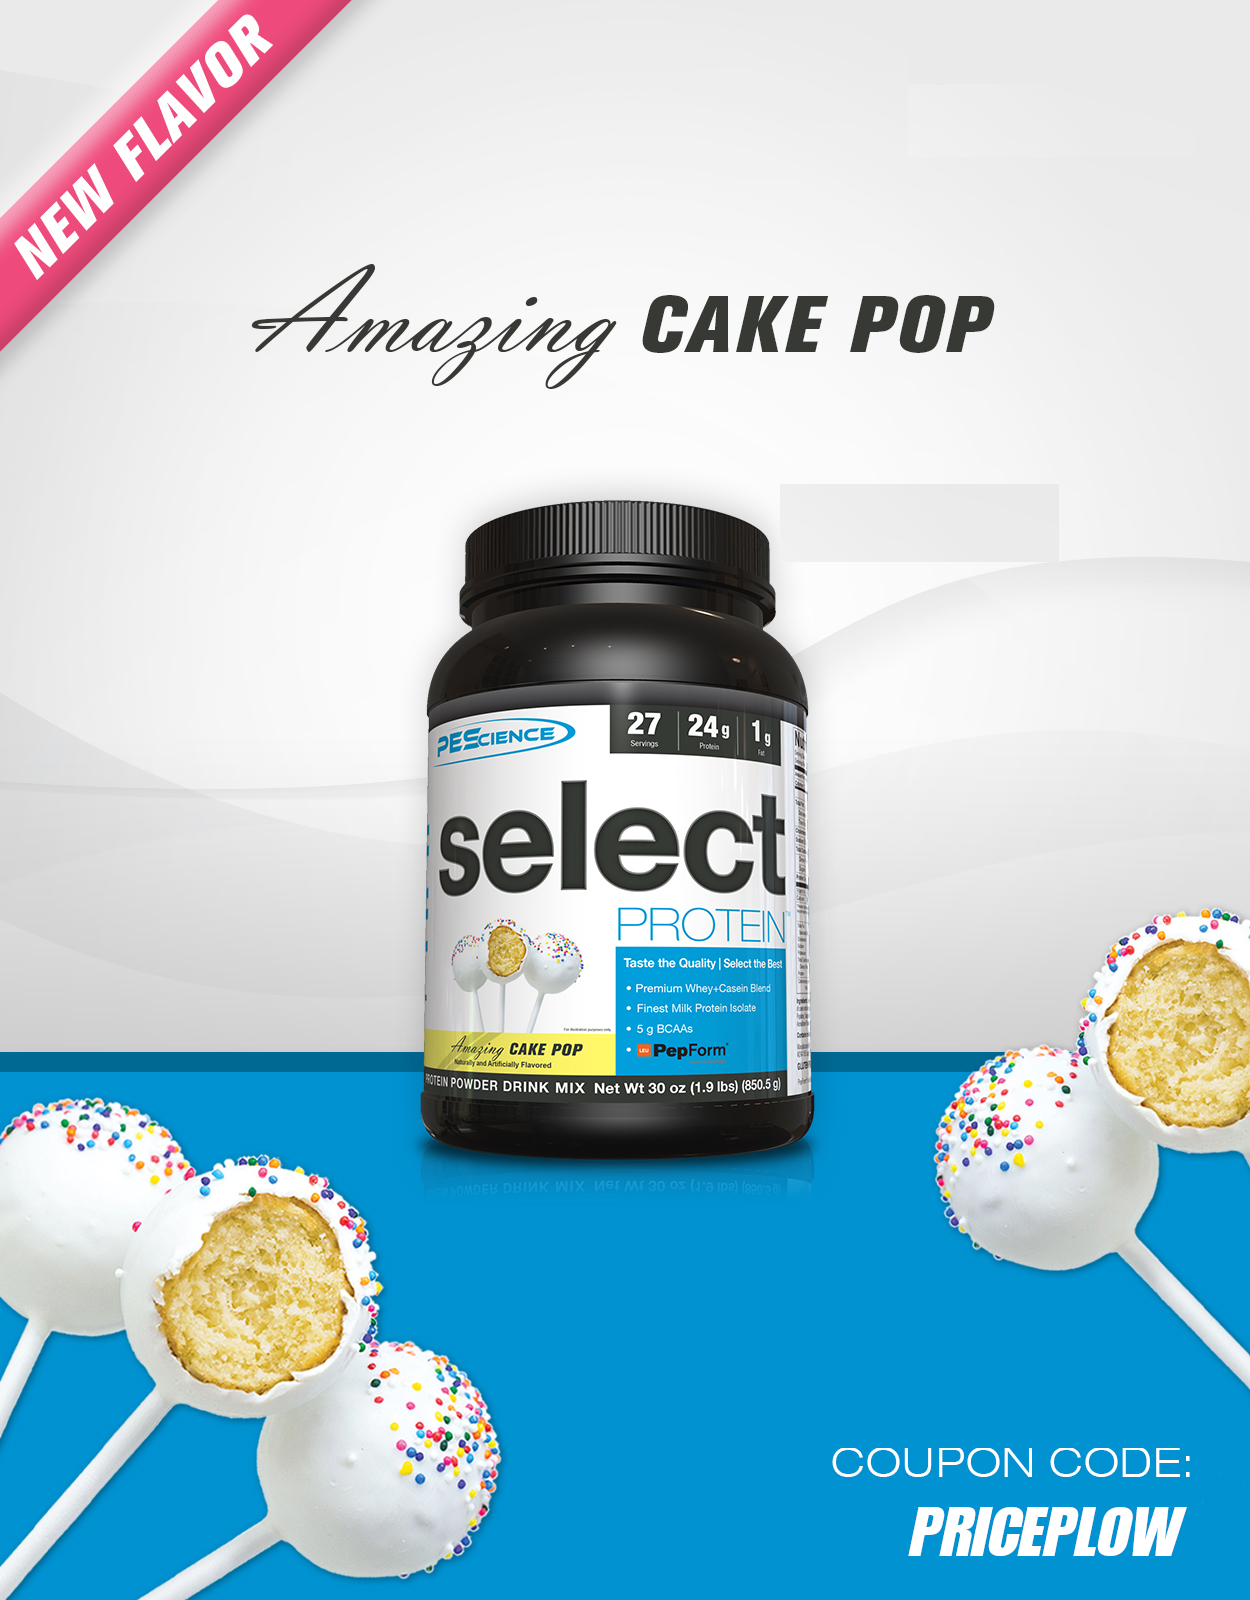 Select Protein Cake Pop